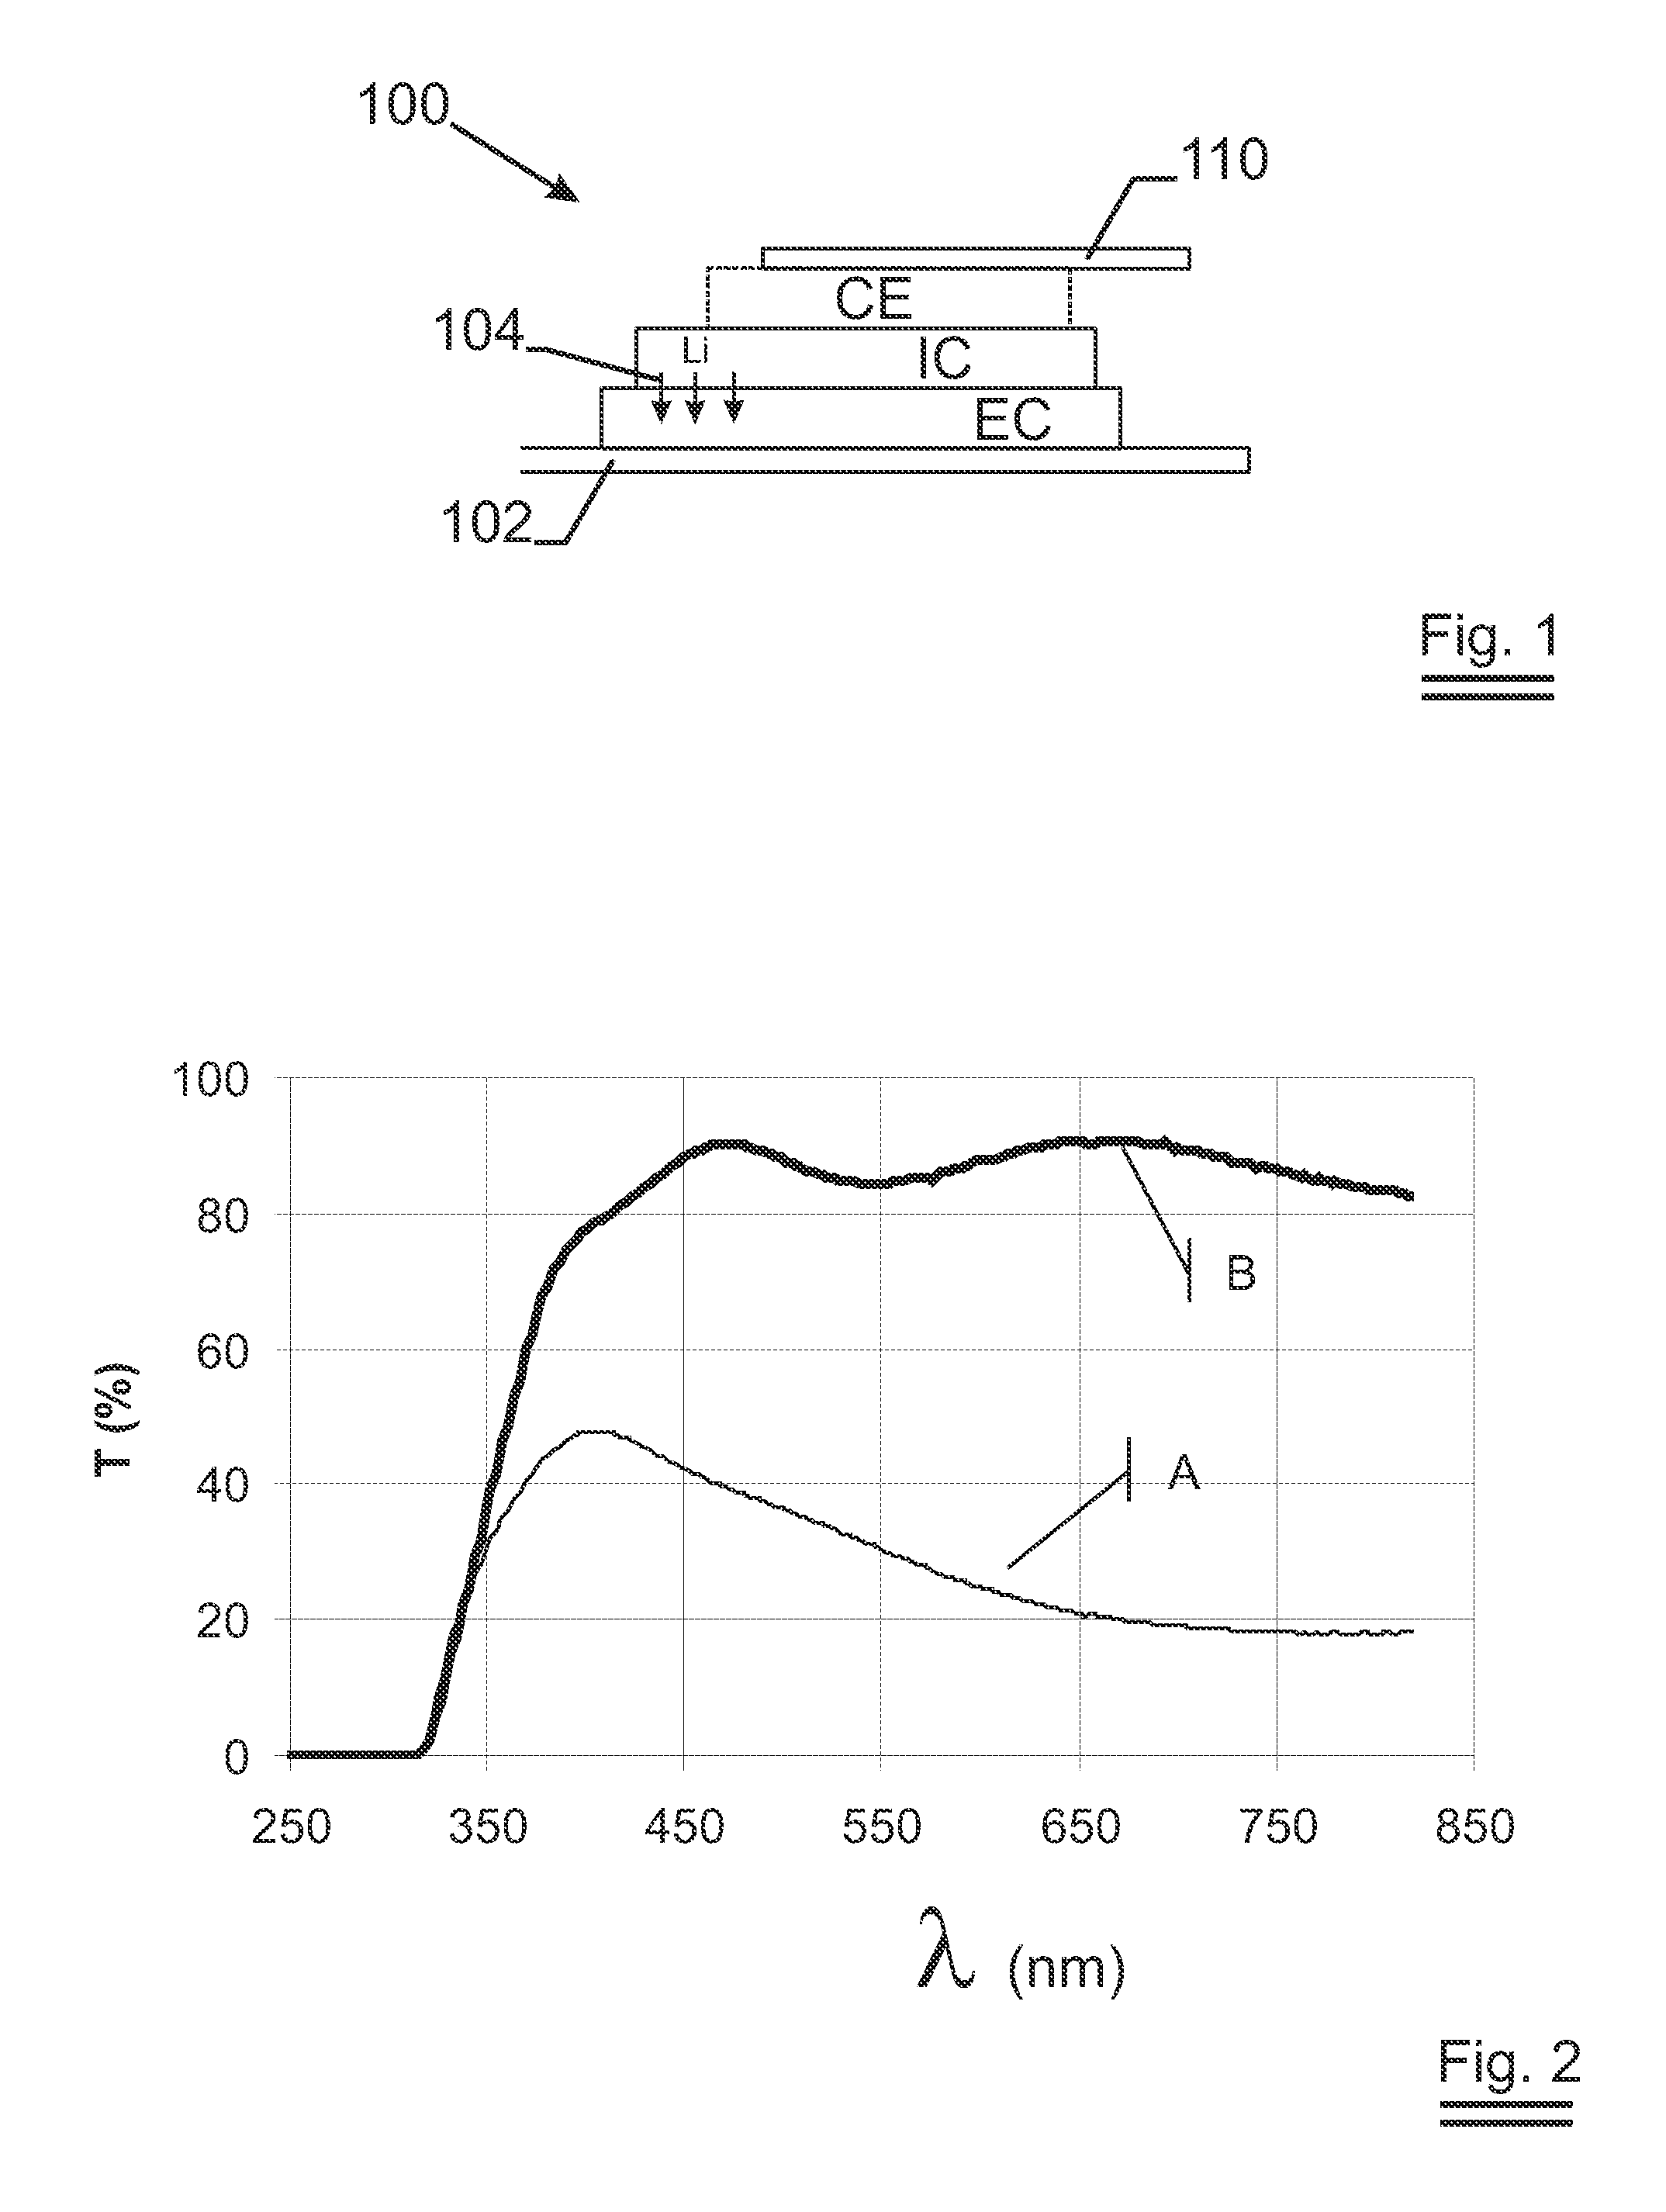 Method of making an ion-switching device without a separate lithiation step